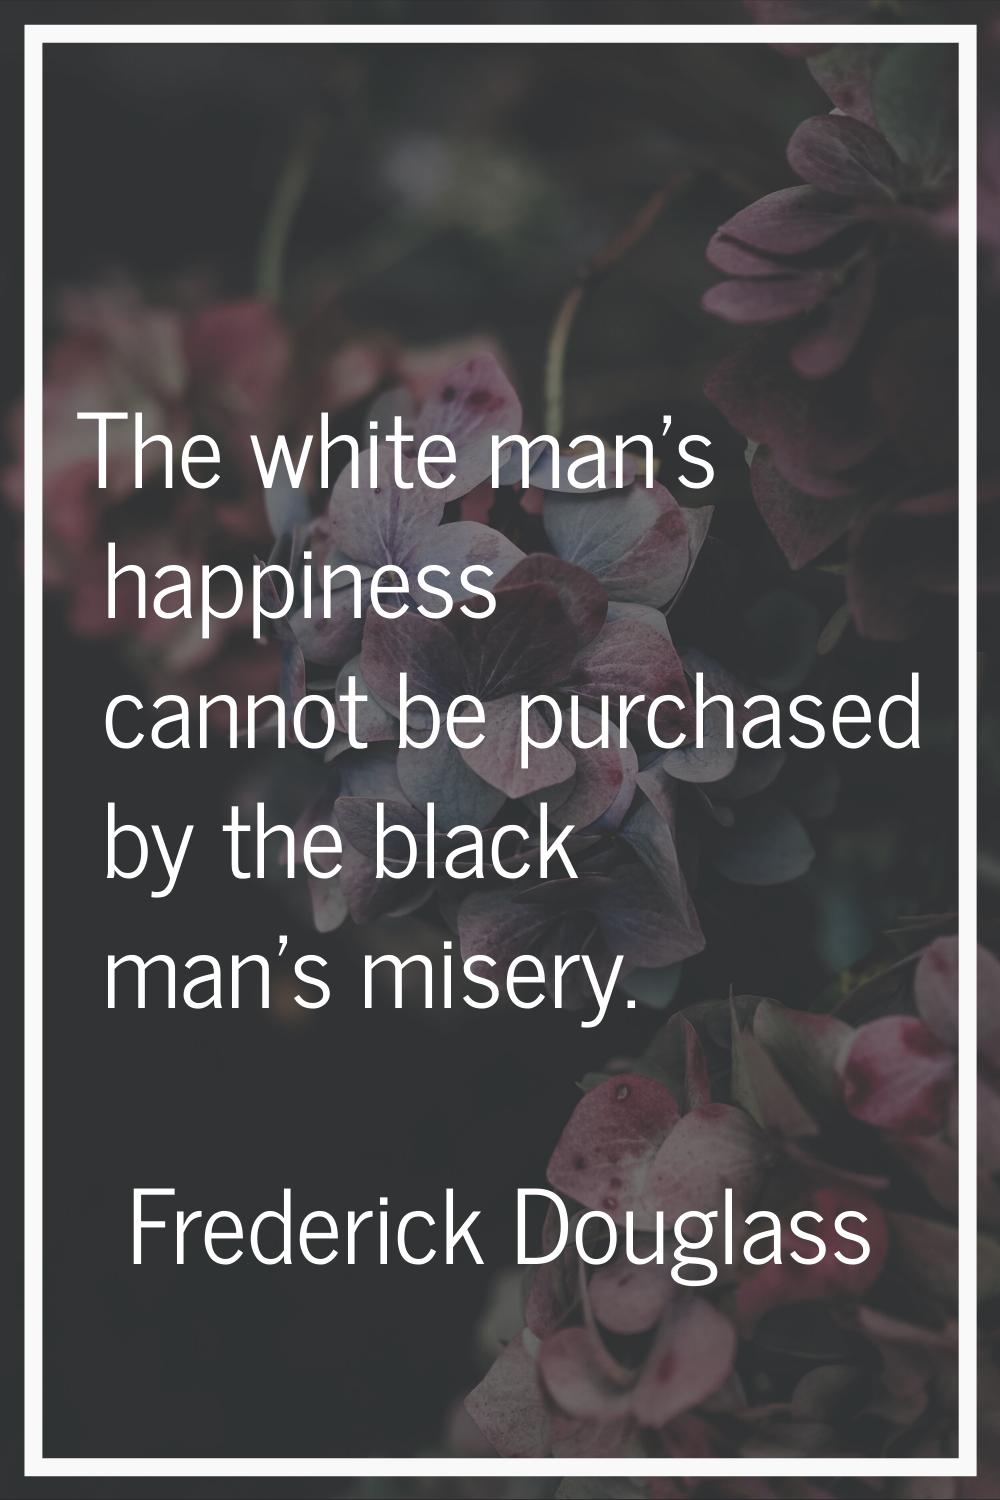 The white man's happiness cannot be purchased by the black man's misery.